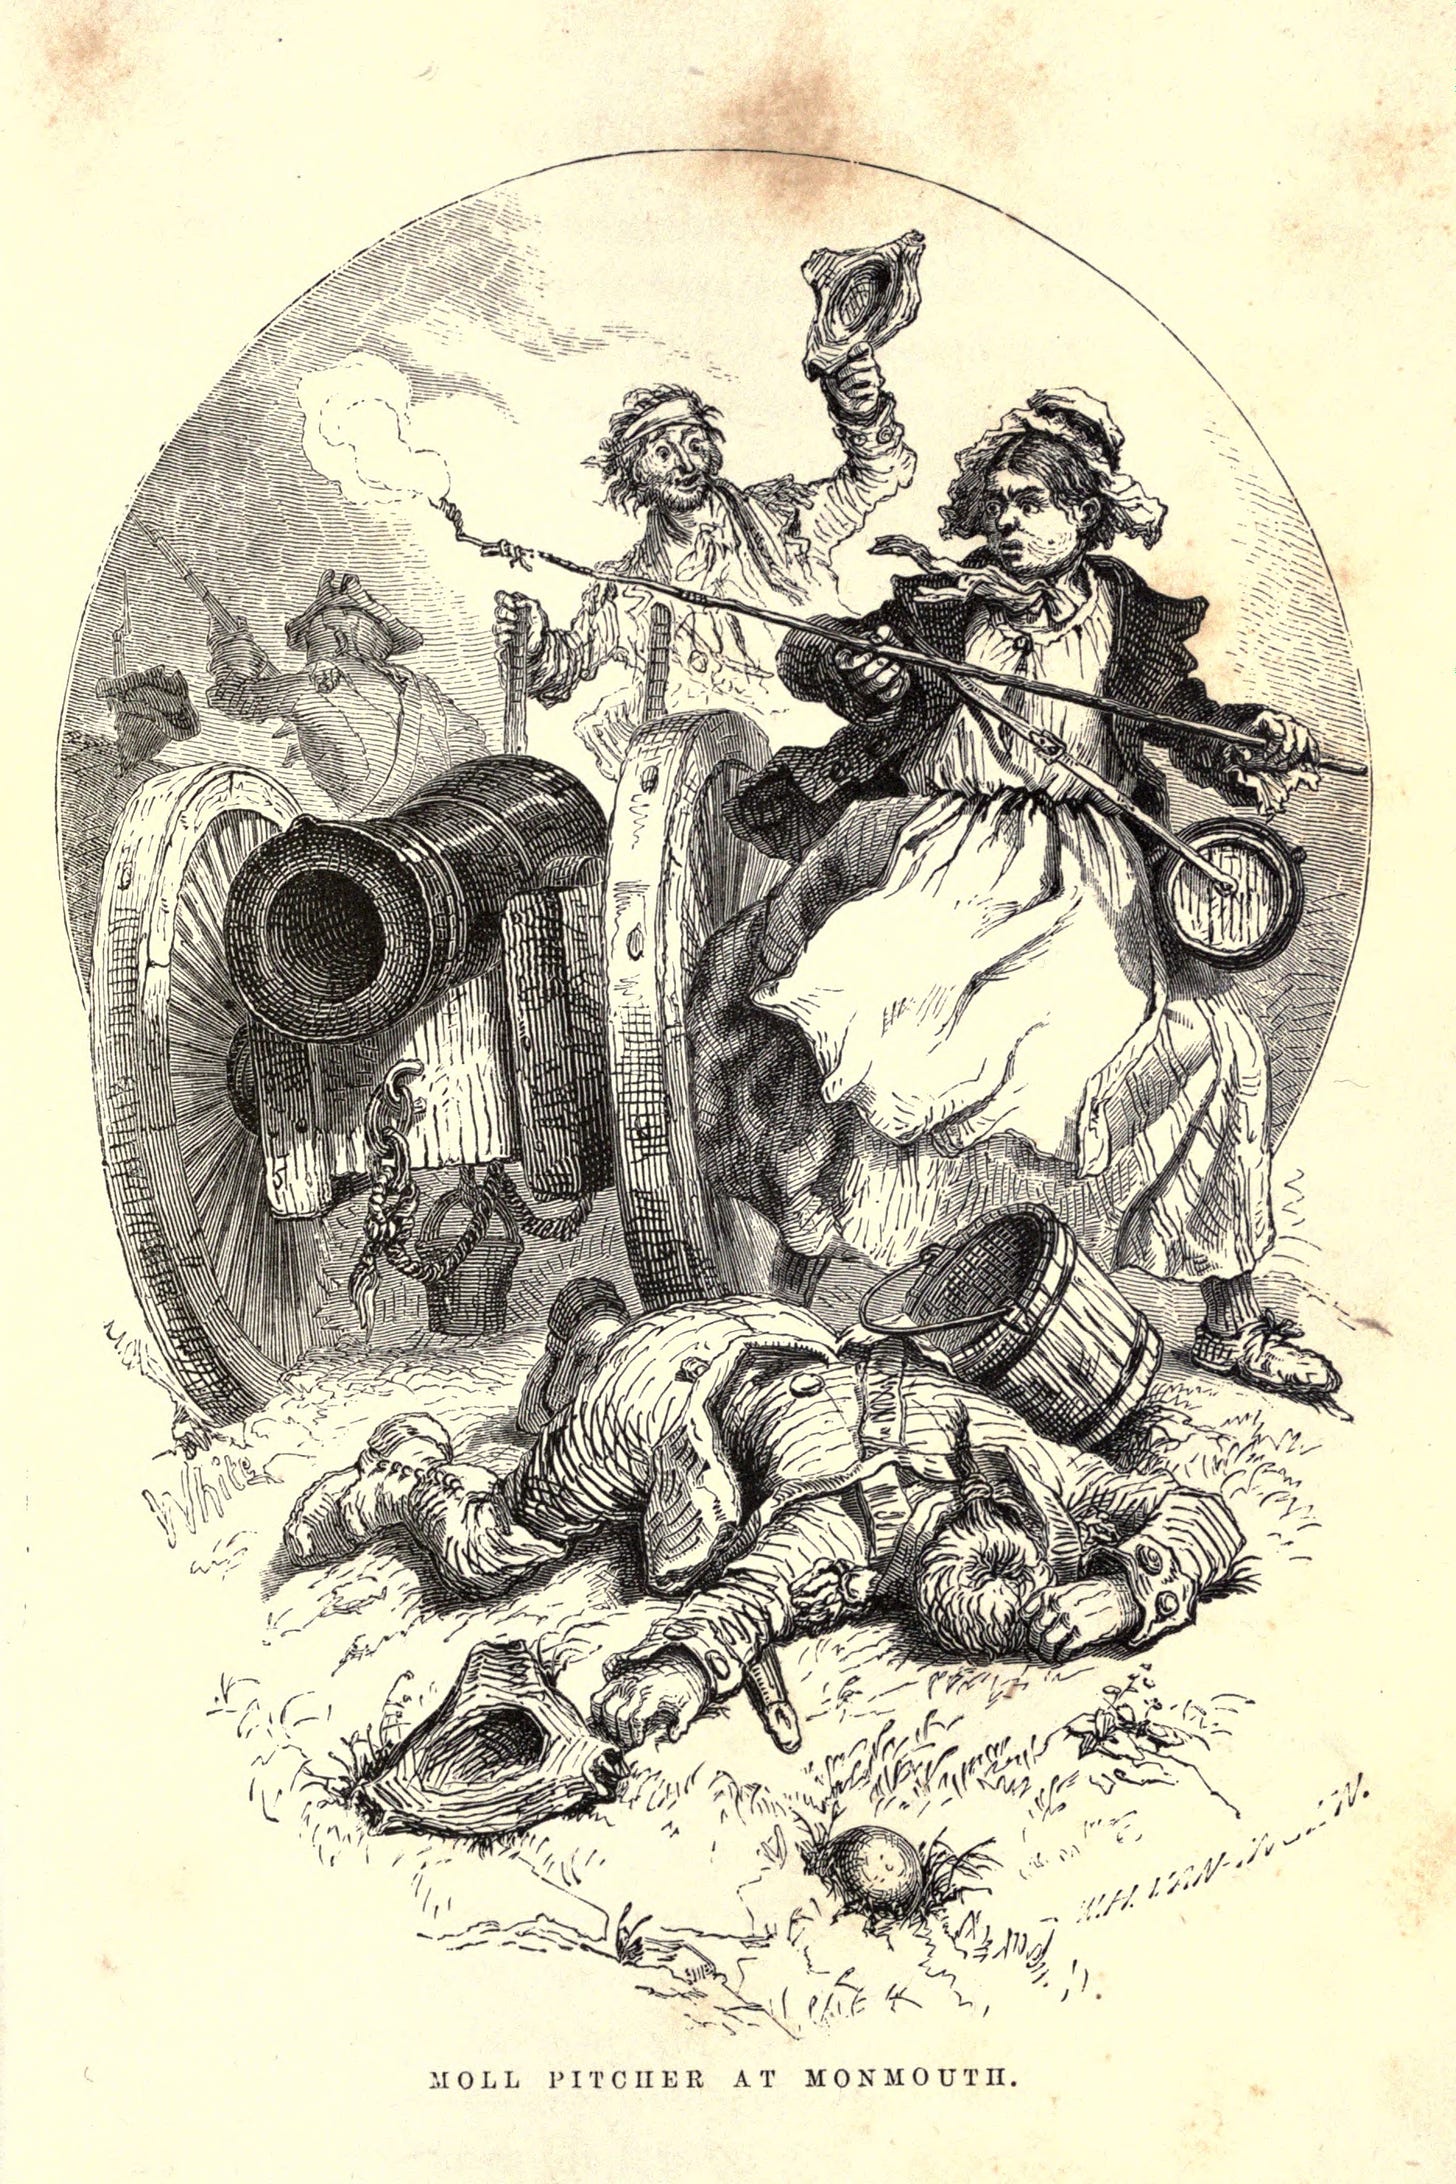 Image is an engraving from Headley's Life of Washington, showing "Moll Pitcher at Monmouth" preparing to fire a cannon while standing over the body of her dead husband.